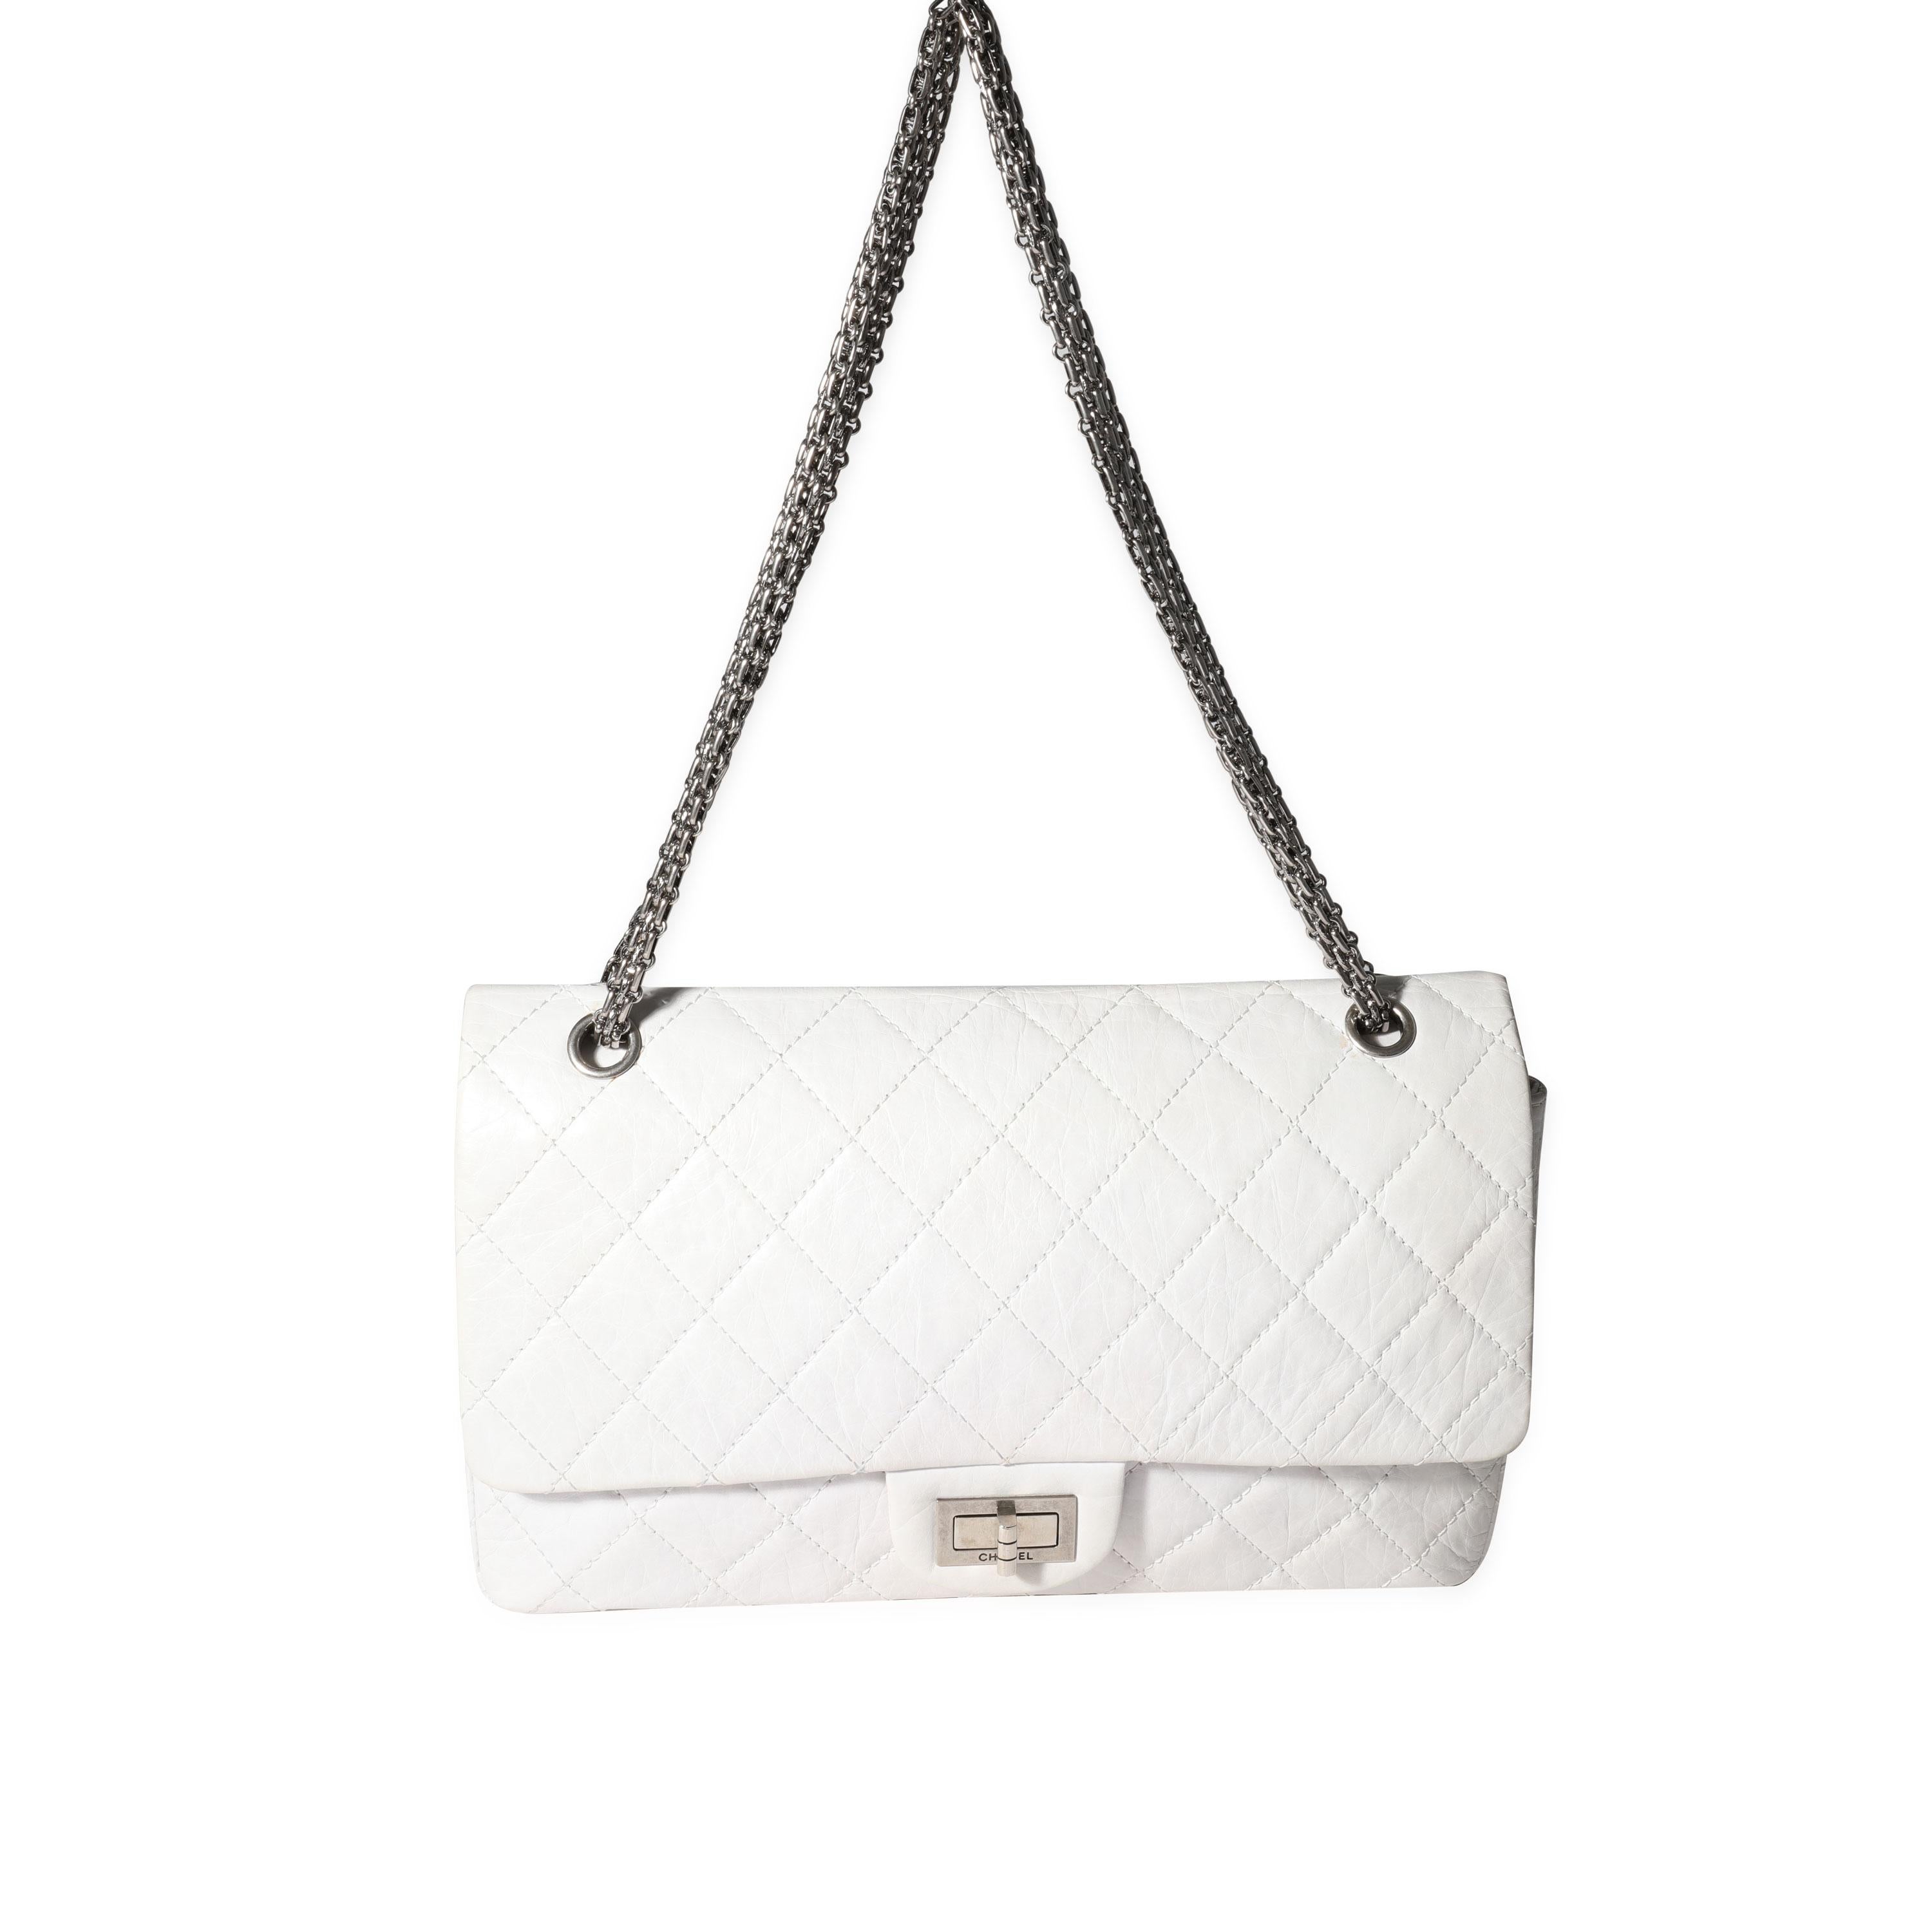 Listing Title: Chanel White Aged Calfskin Quilted 50th Anniversary 2.55 Reissue 227 Flap
SKU: 119665
Condition: Pre-owned (3000)
Handbag Condition: Good
Condition Comments: Moderate discoloration at bottom corners and edges. Light stain at interior